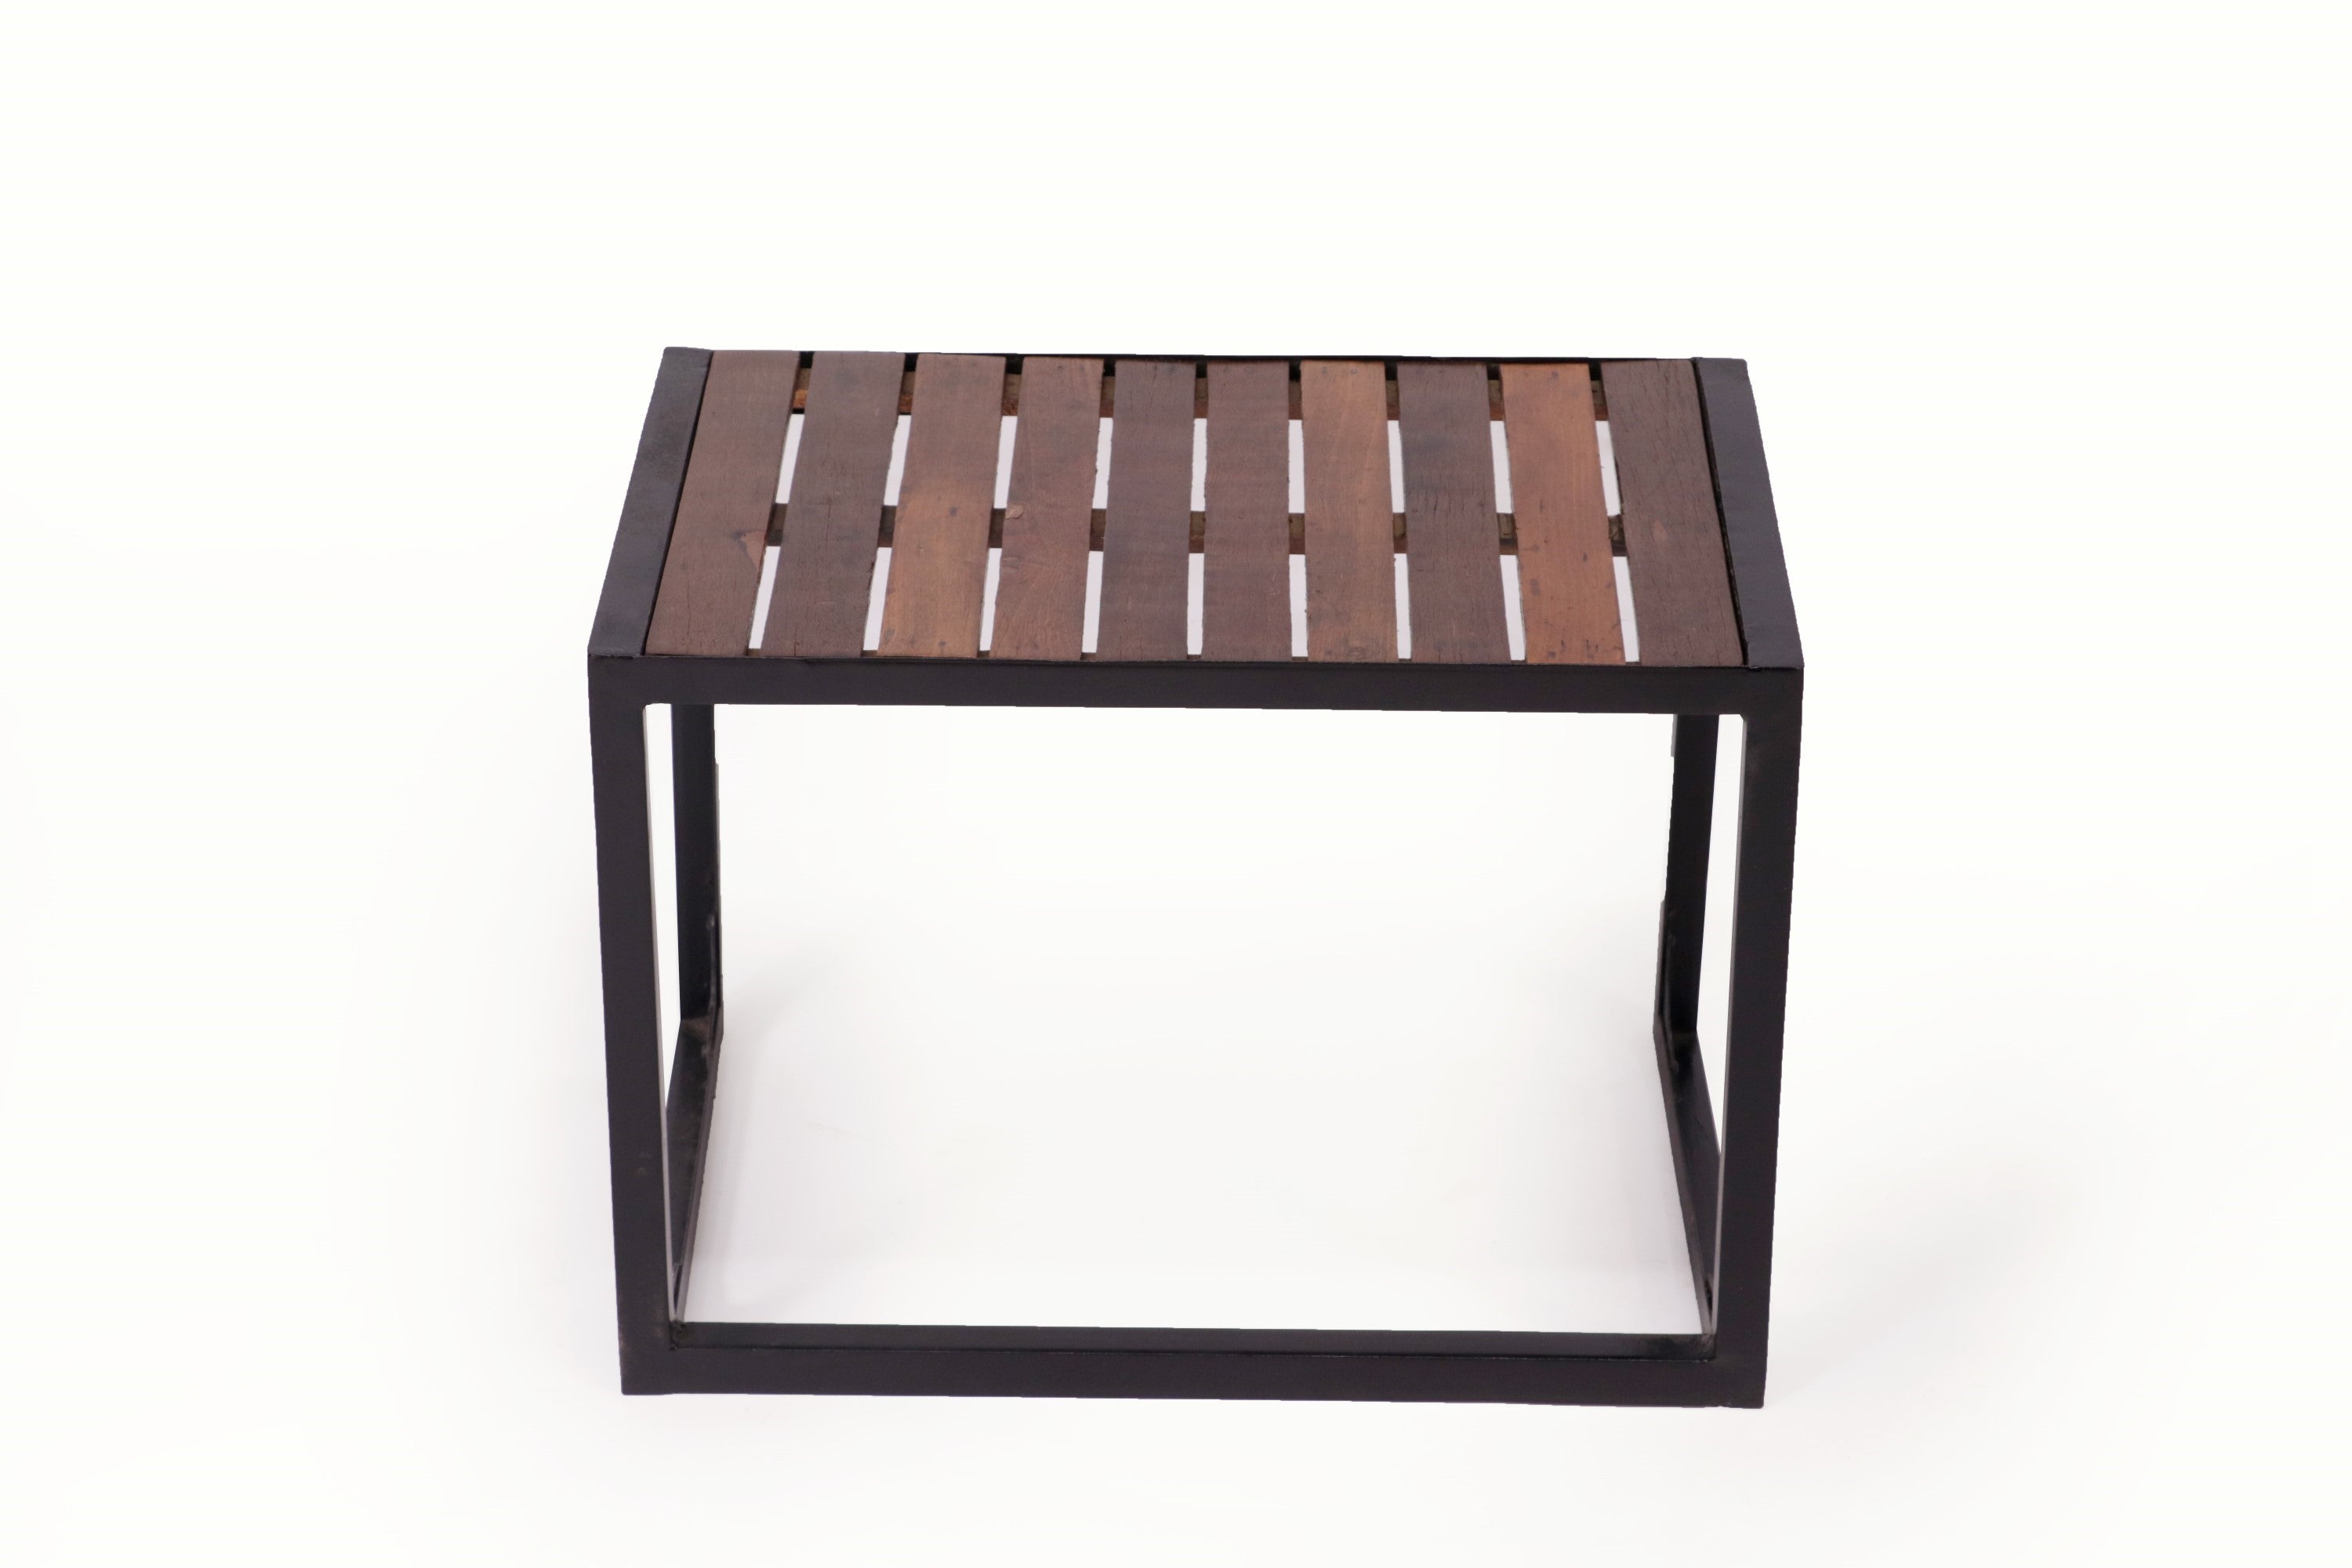 Wooden Metallic Frame Table Stand Stool